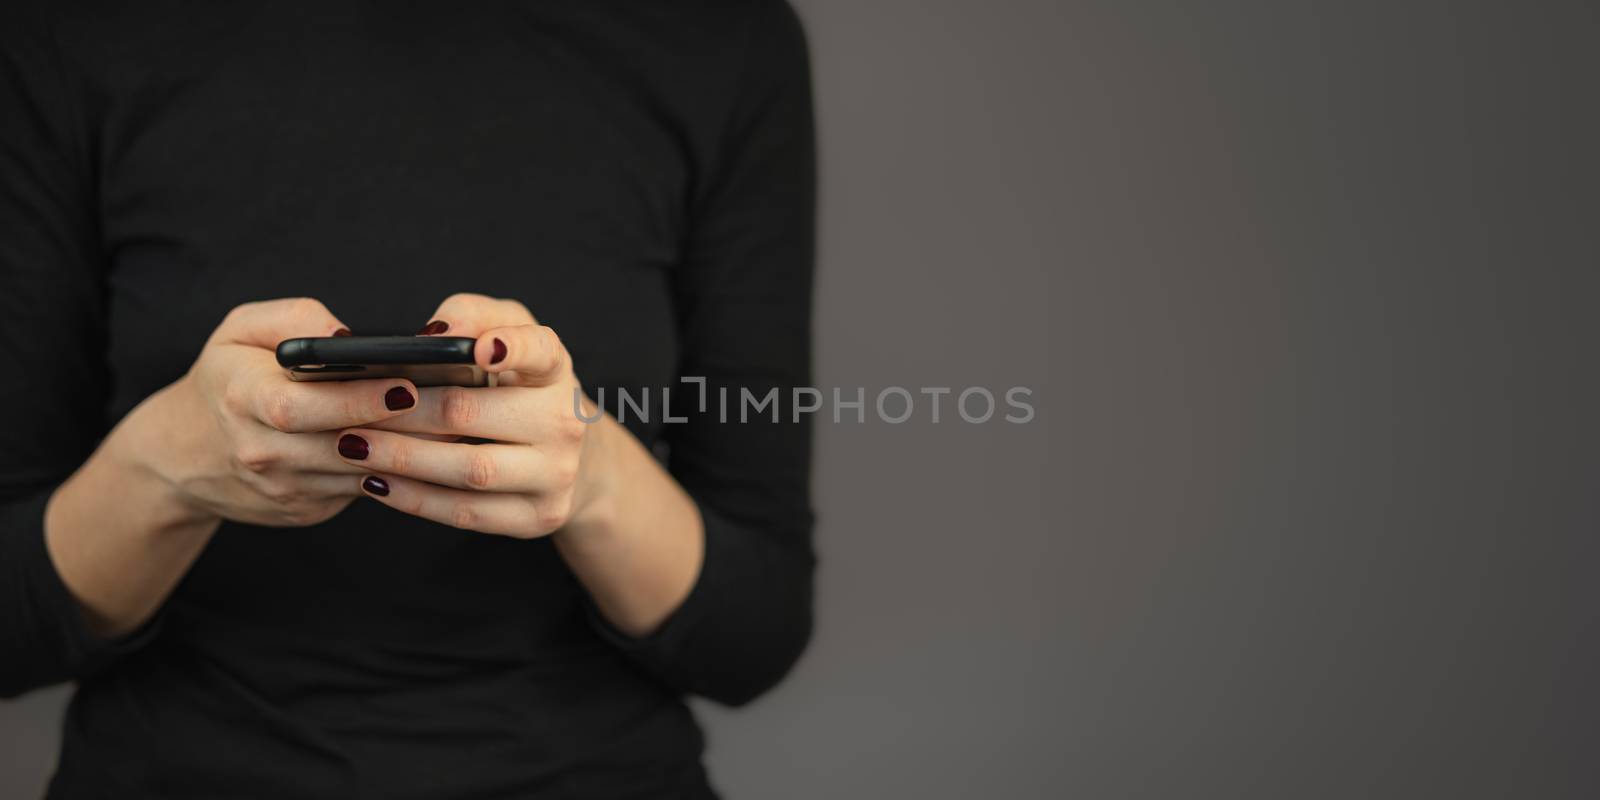 Texting on the phone, using smartphone, copy space backdrop by photoboyko